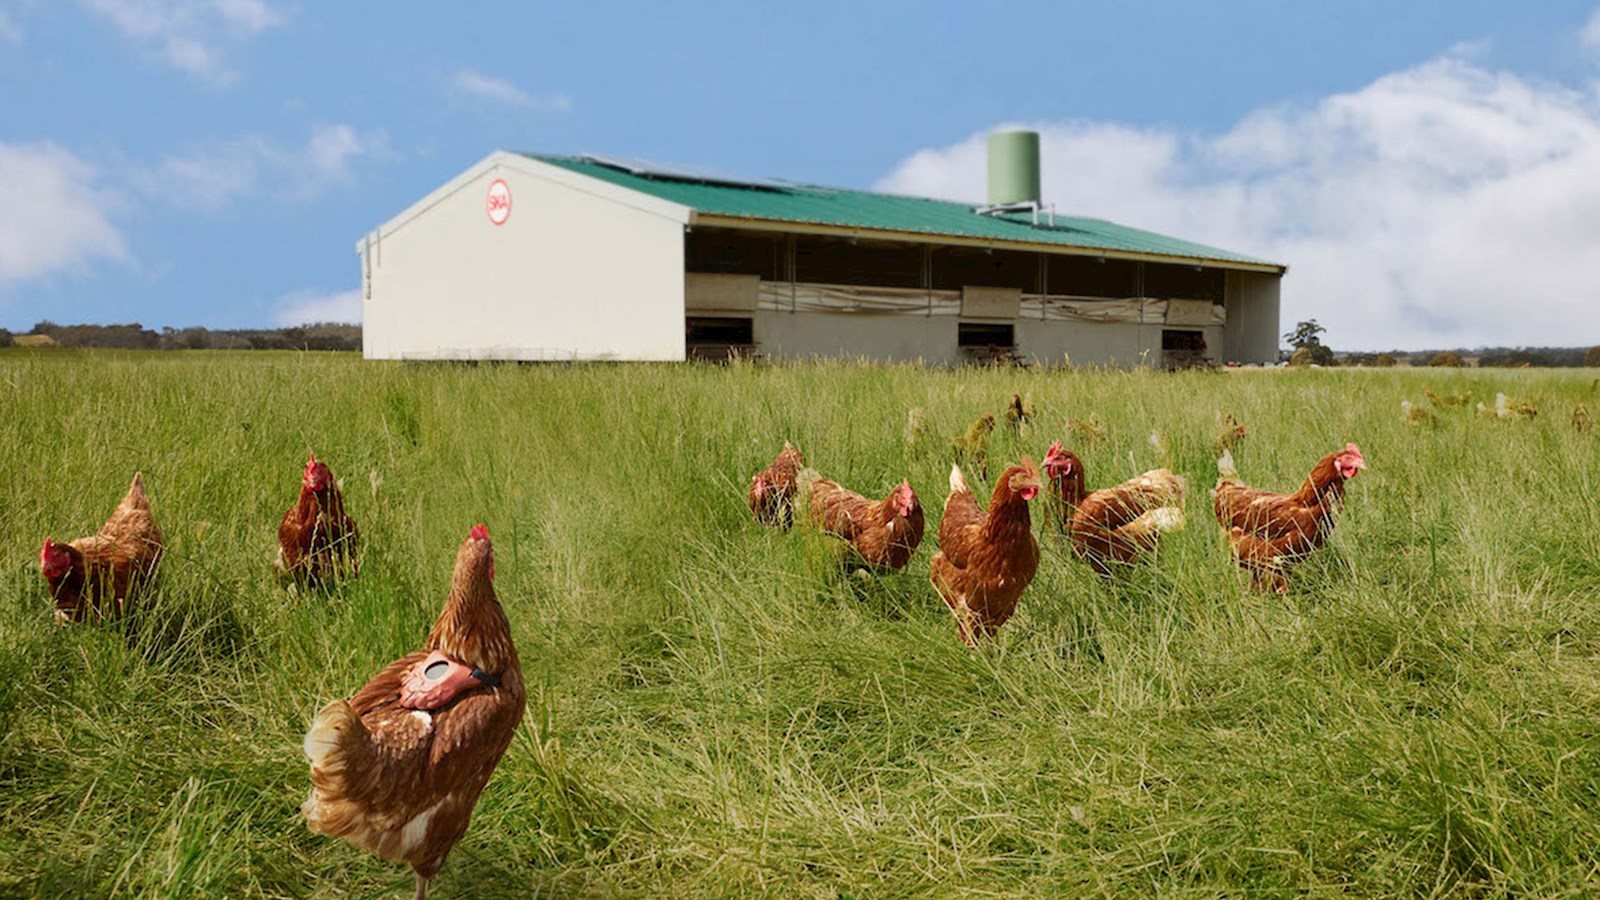 Free range chickens in a field with FitChix counters on them